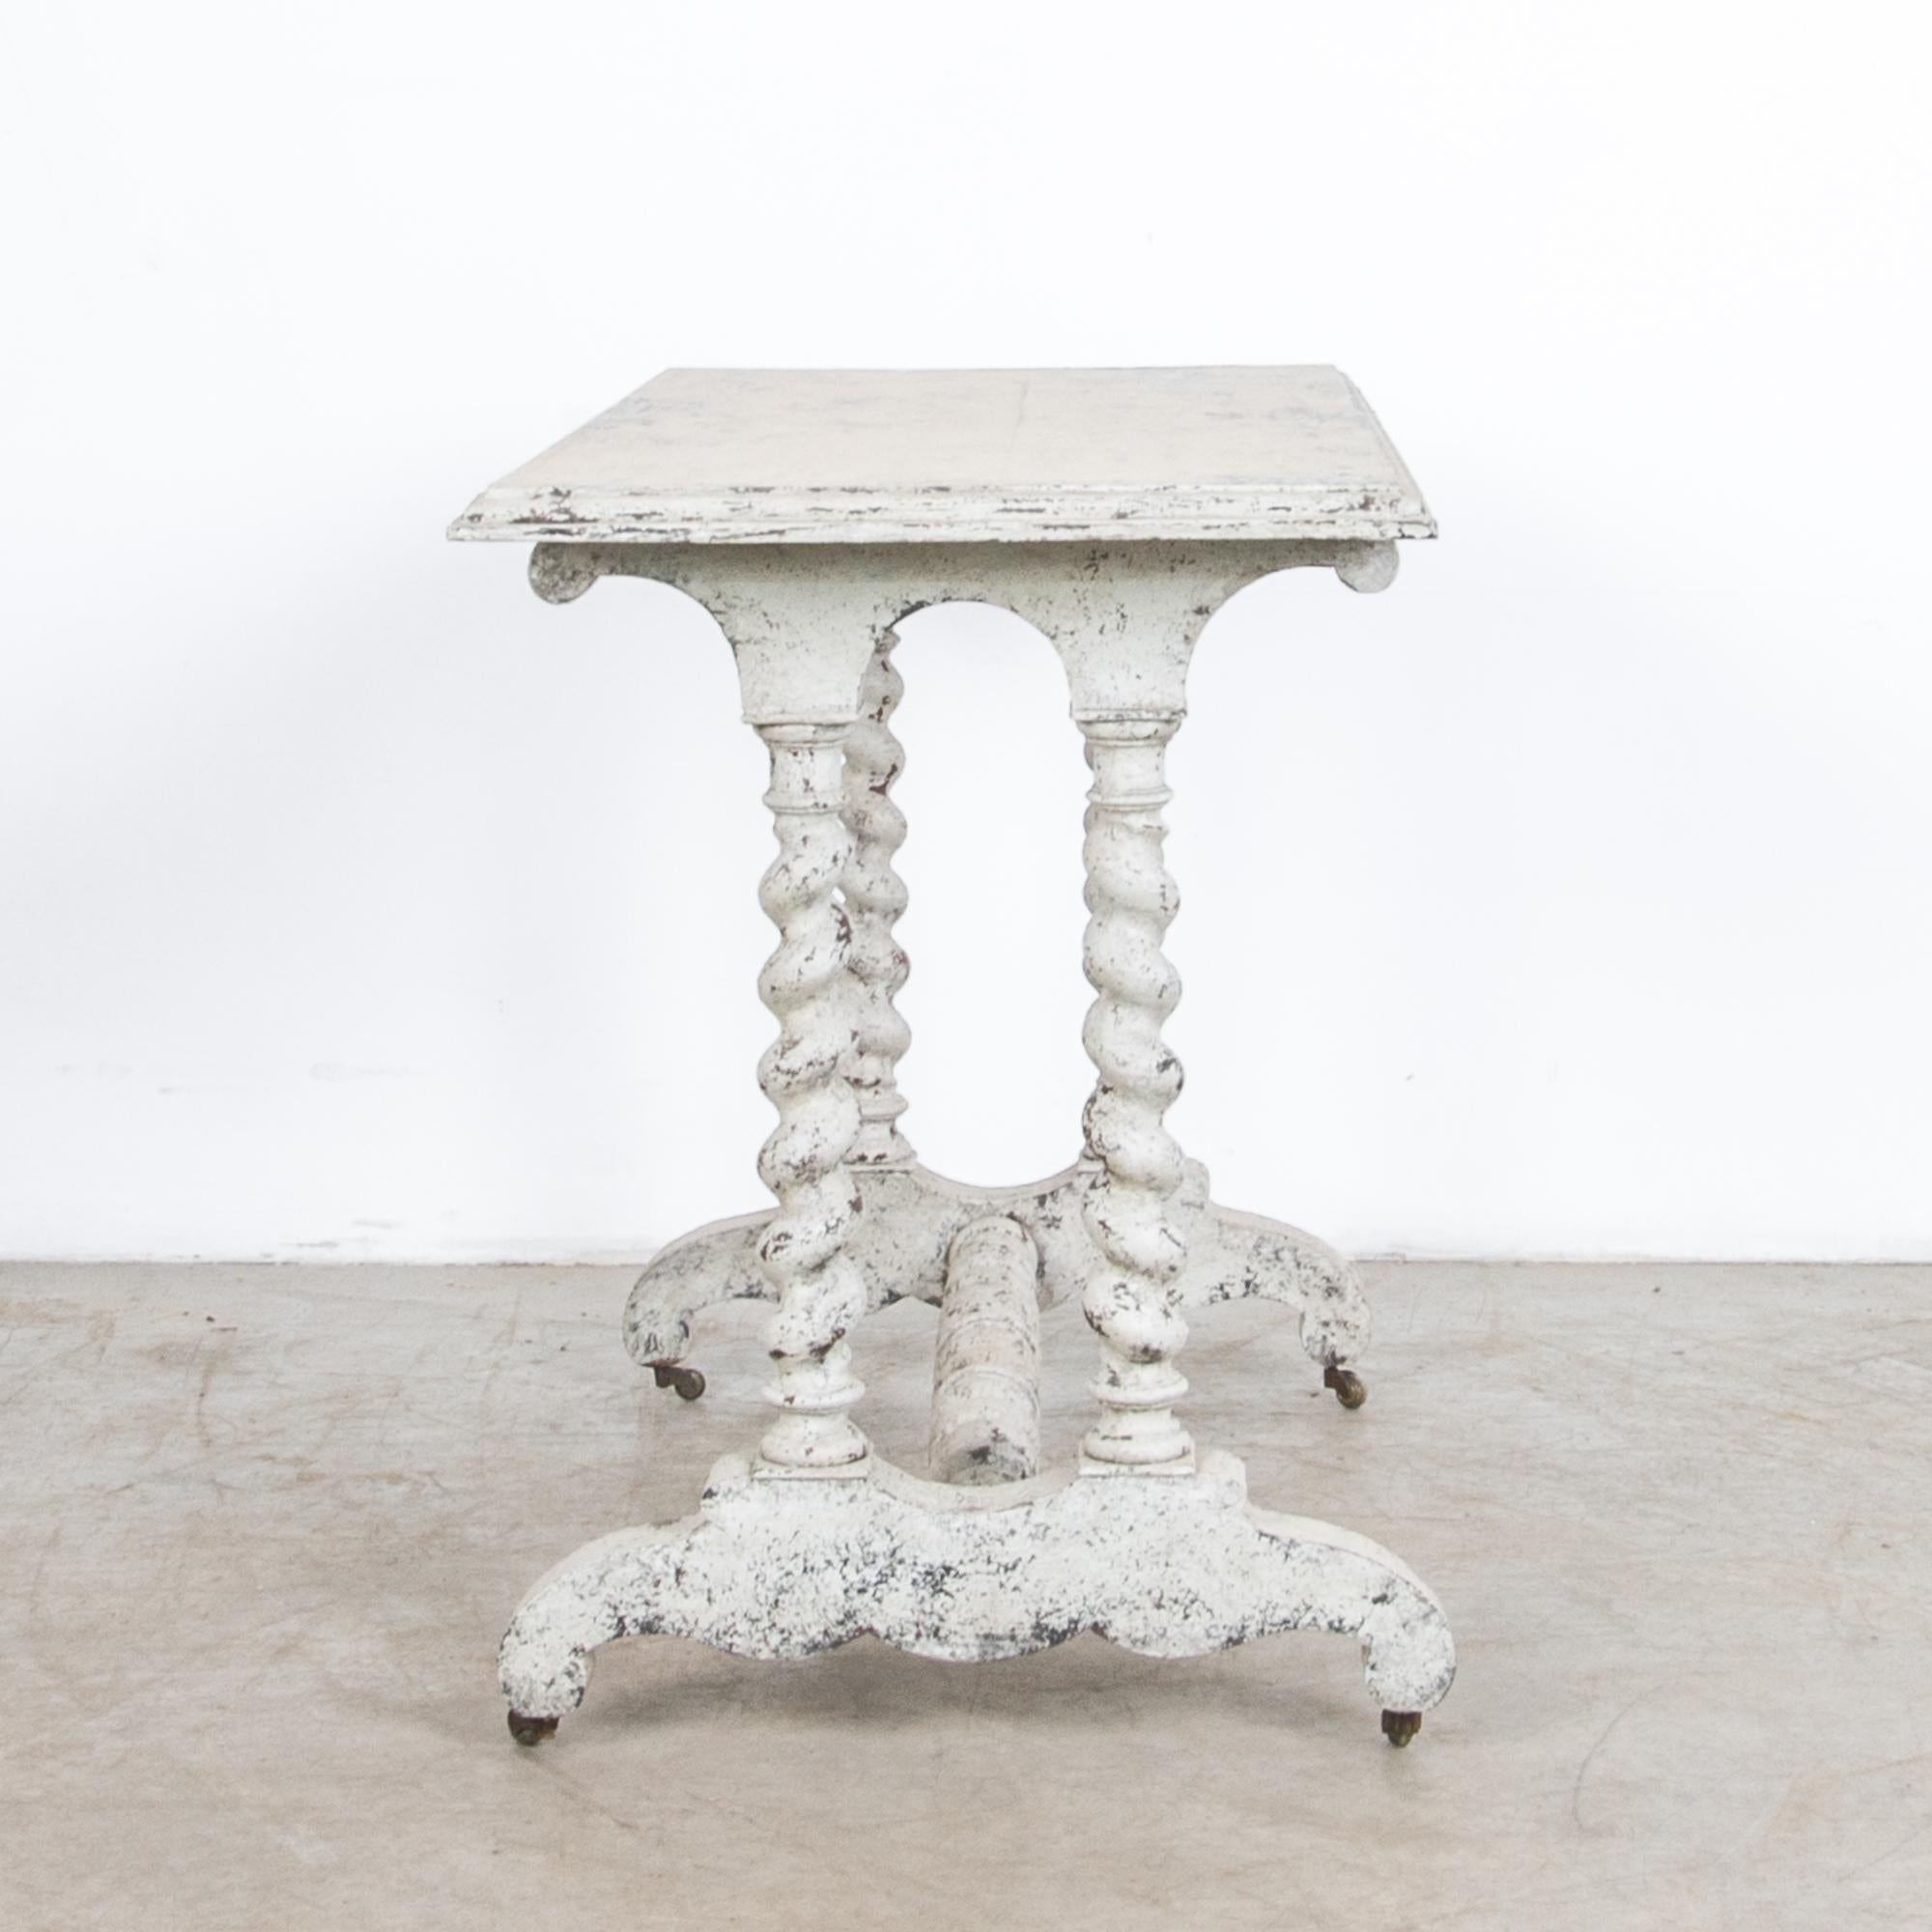 French Provincial Antique French White Painted Table on Wheels